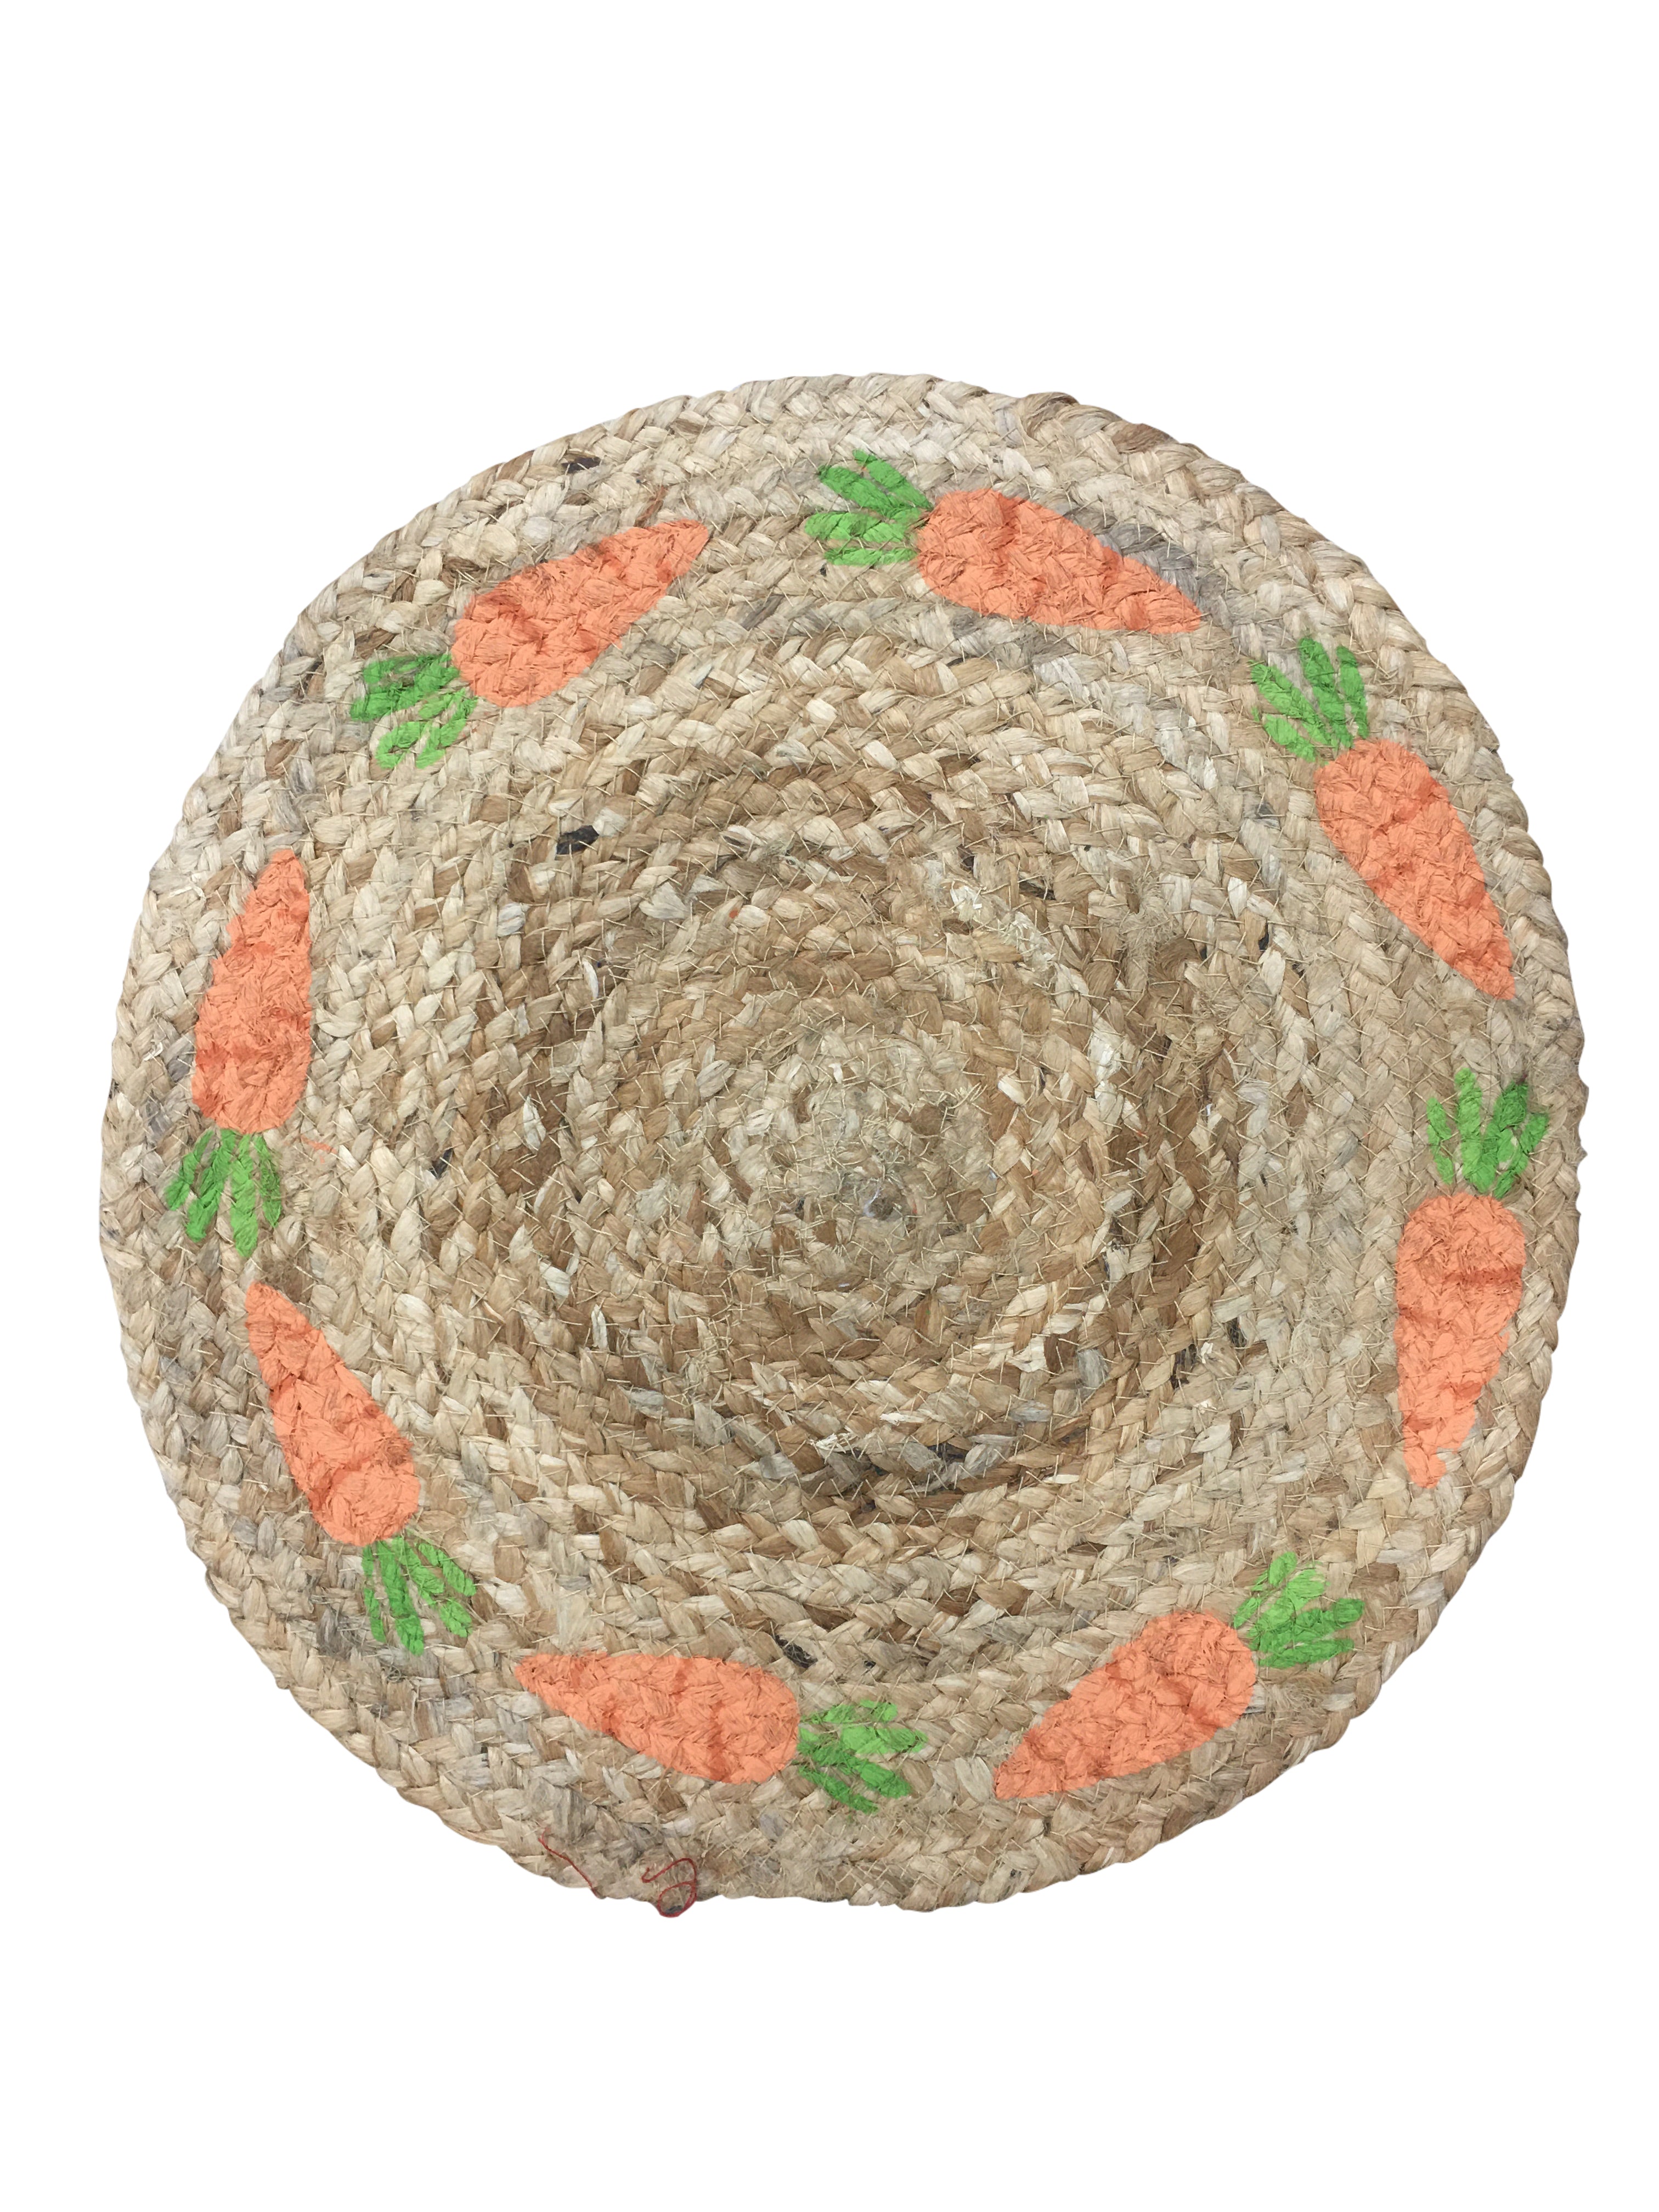 Jute Placemats, Chargers / Set of 2 / 15 in. Round/ Natural With Carrort Design